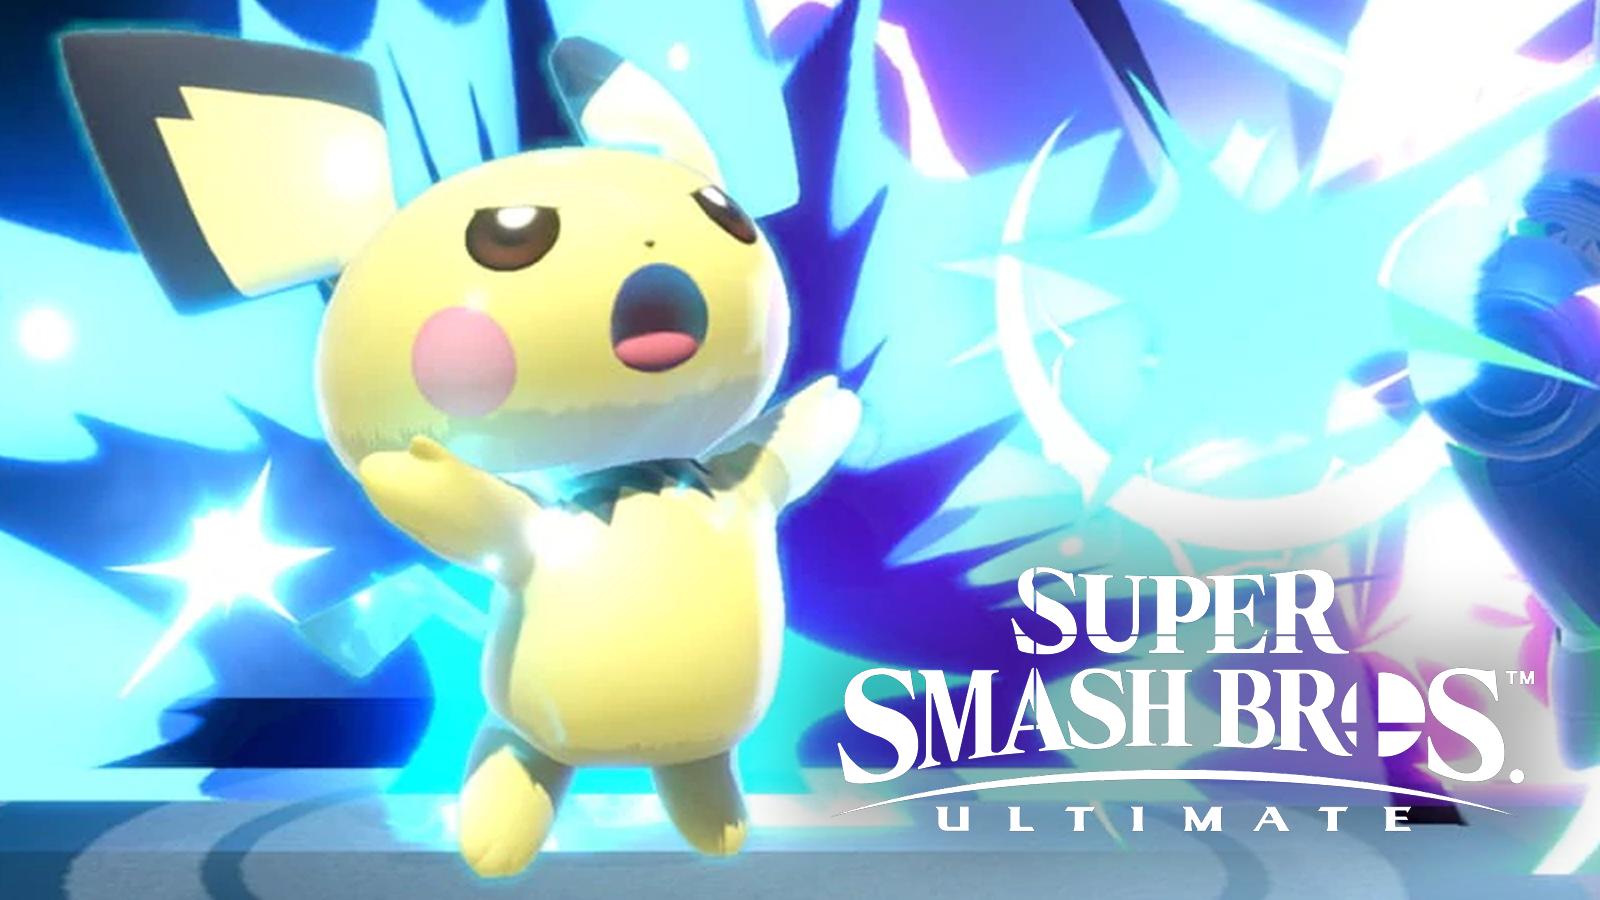 Pichu battles in Super Smash Bros Ultimate update 11.0.0 patch notes.